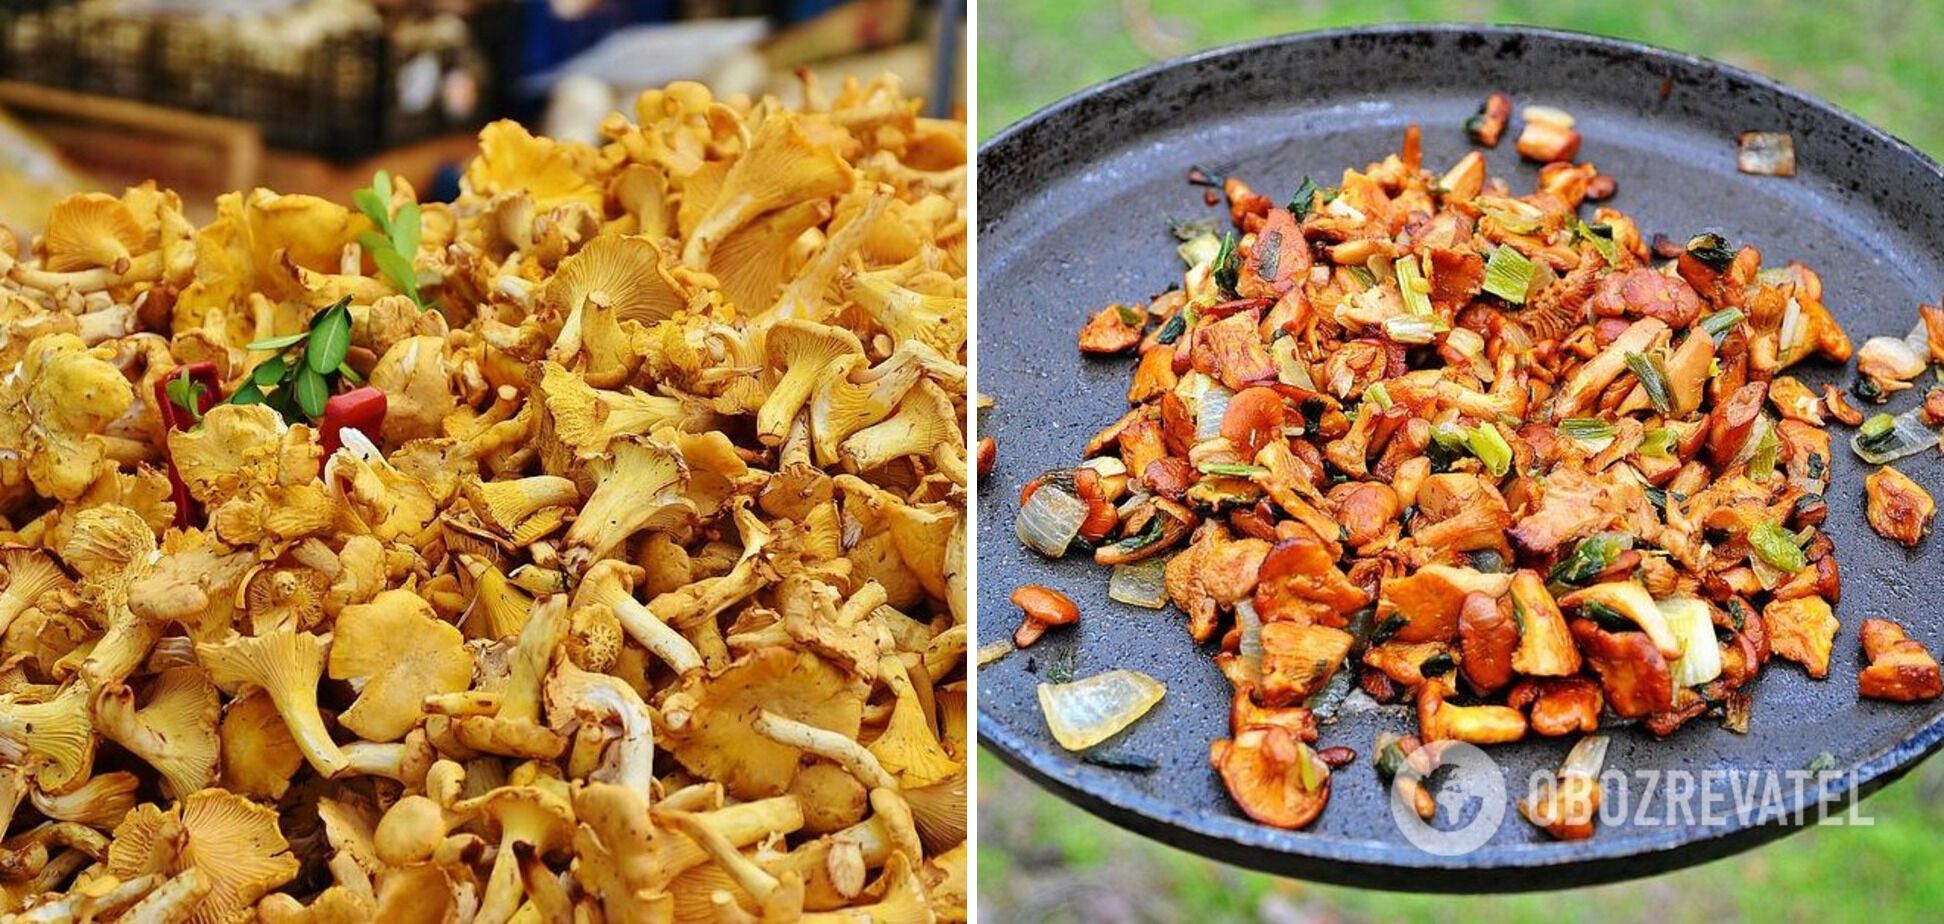 How to fry chanterelles in a pan deliciously